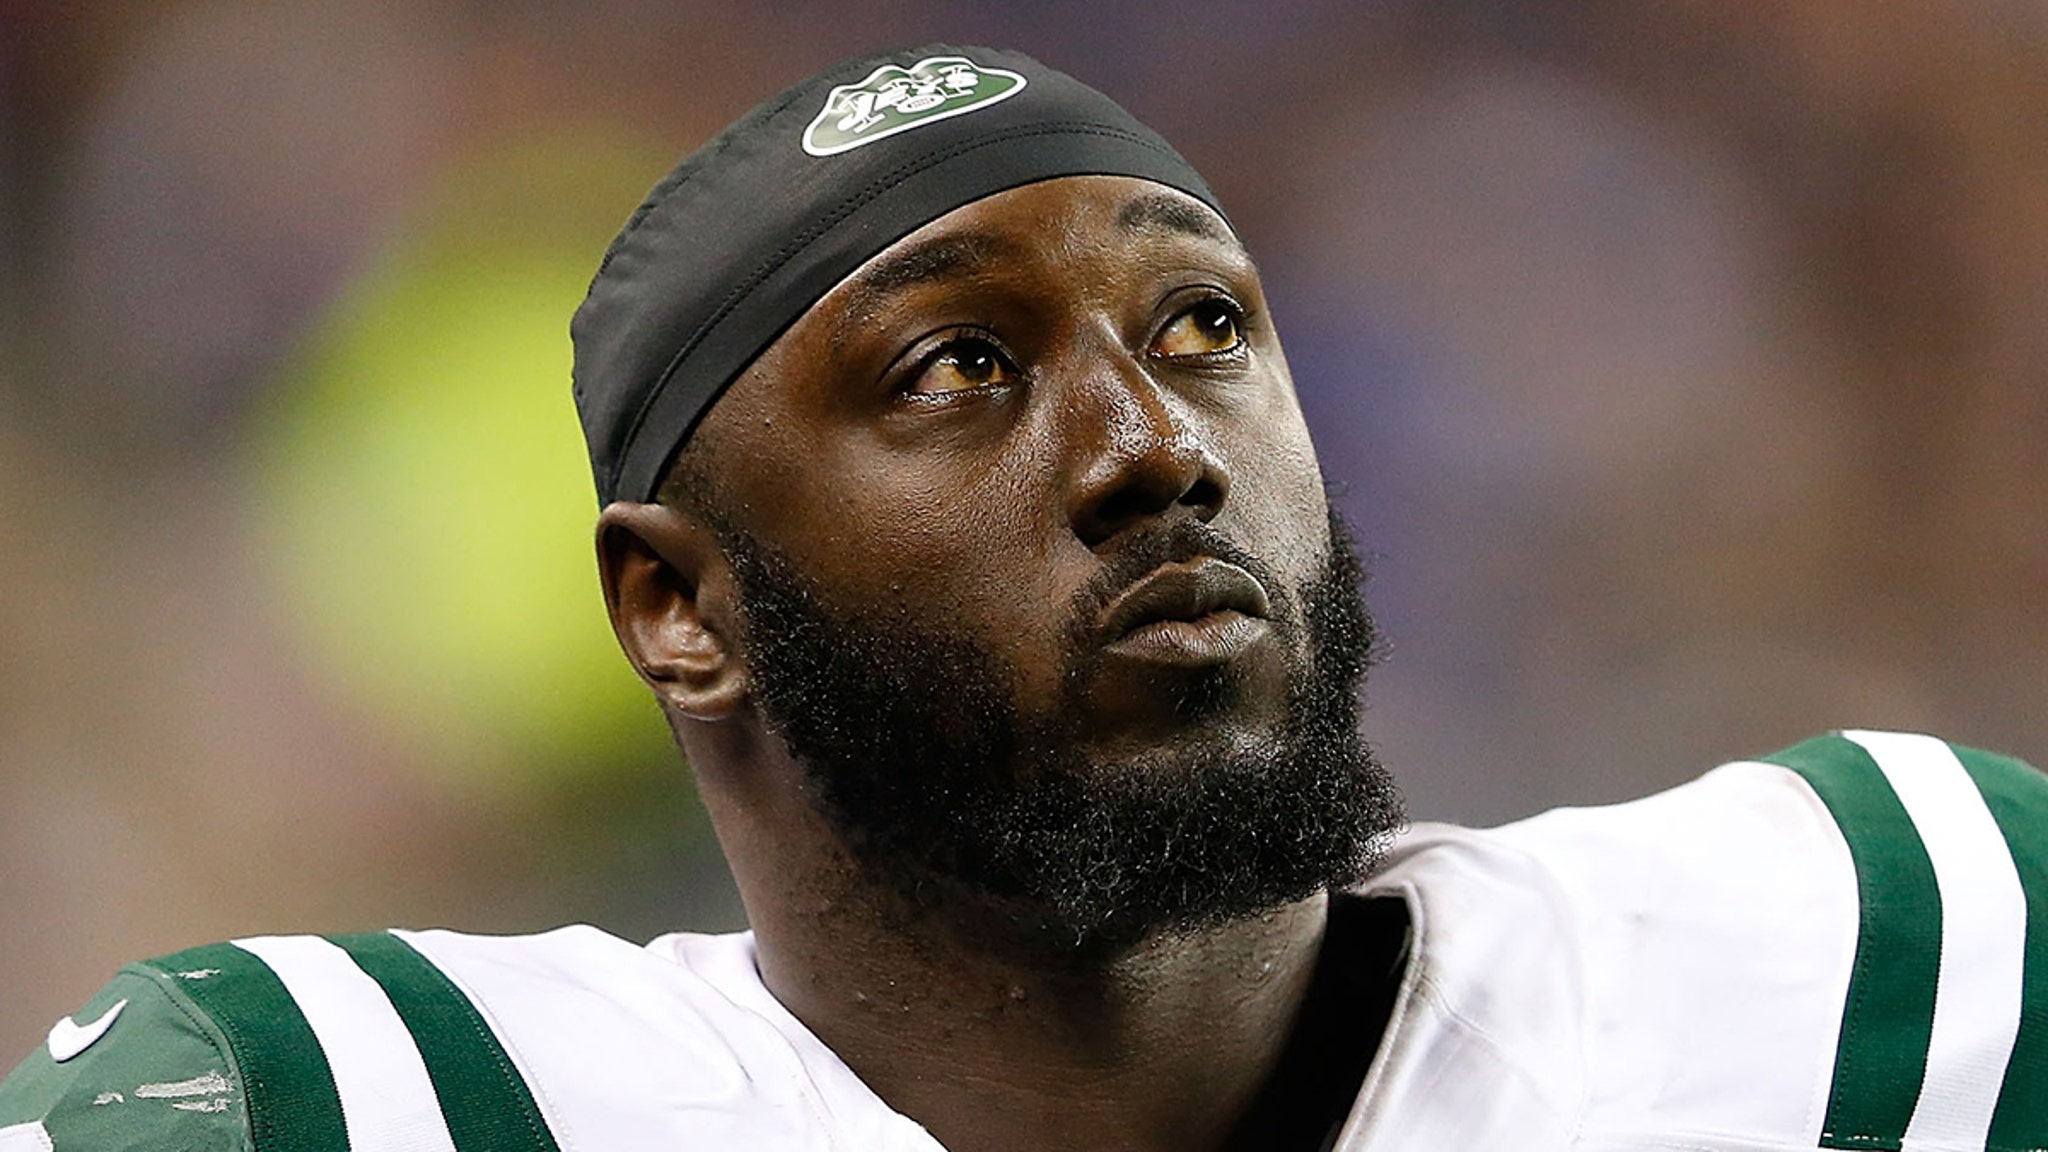 NFL’s Muhammad Wilkerson Arrested, Accused Of Driving Drunk W/ Loaded Gun In Car